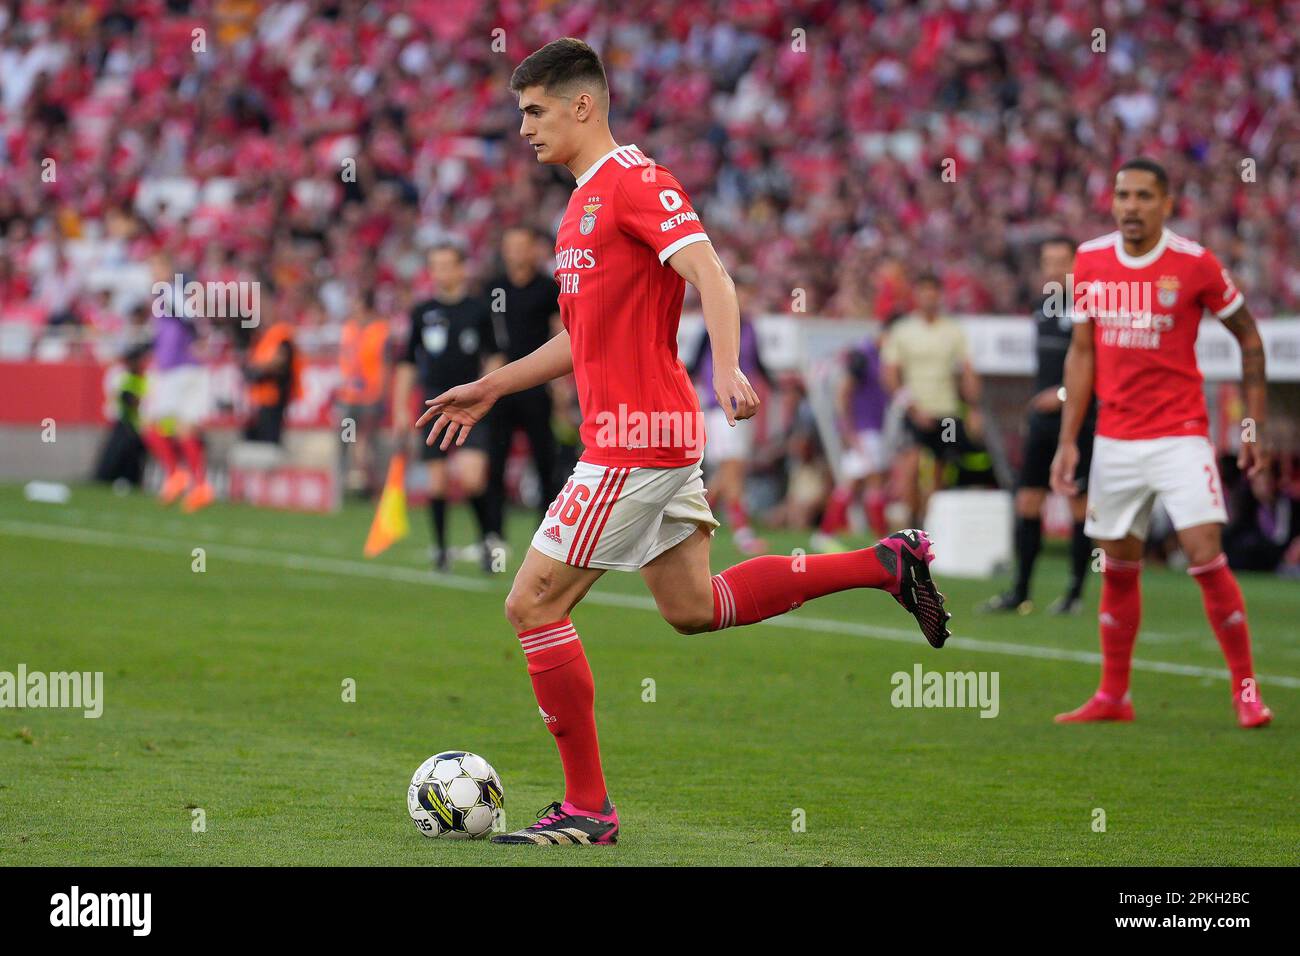 Lisbon, Portugal. 07th Apr, 2023. Antonio Silva from SL Benfica (C) and Gilberto from SL Benfica (R) in action during Liga Portugal Bwin football match between SL Benfica and FC Porto at Estadio da Luz.Final score: SL Benfica 1:2 FC Porto (Photo by Bruno de Carvalho/SOPA Images/Sipa USA) Credit: Sipa USA/Alamy Live News Stock Photo